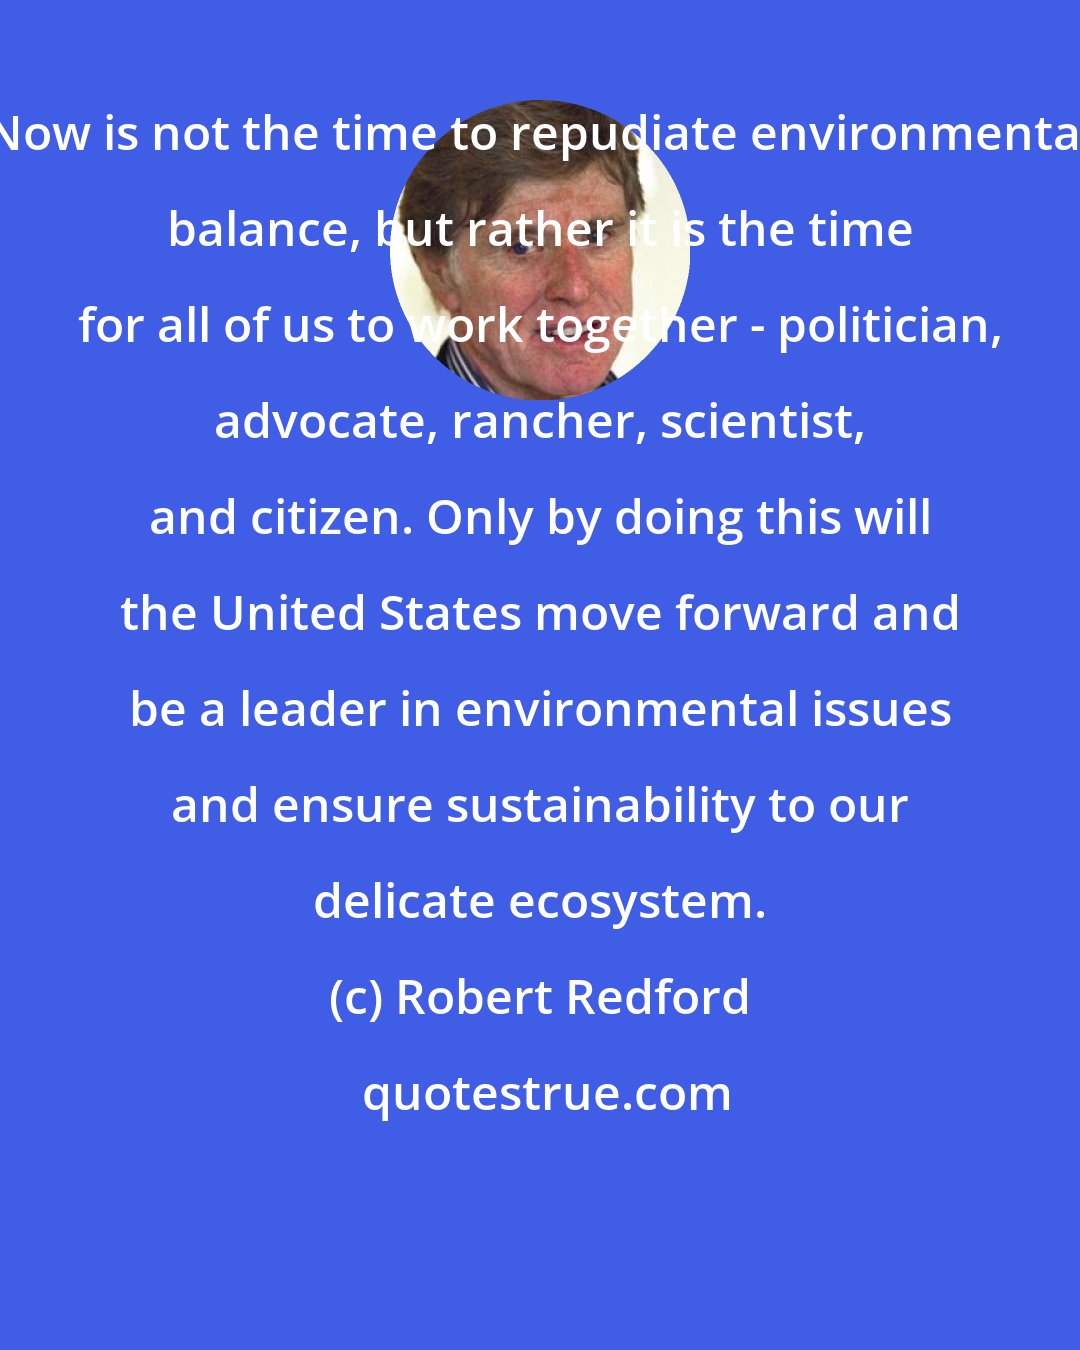 Robert Redford: Now is not the time to repudiate environmental balance, but rather it is the time for all of us to work together - politician, advocate, rancher, scientist, and citizen. Only by doing this will the United States move forward and be a leader in environmental issues and ensure sustainability to our delicate ecosystem.